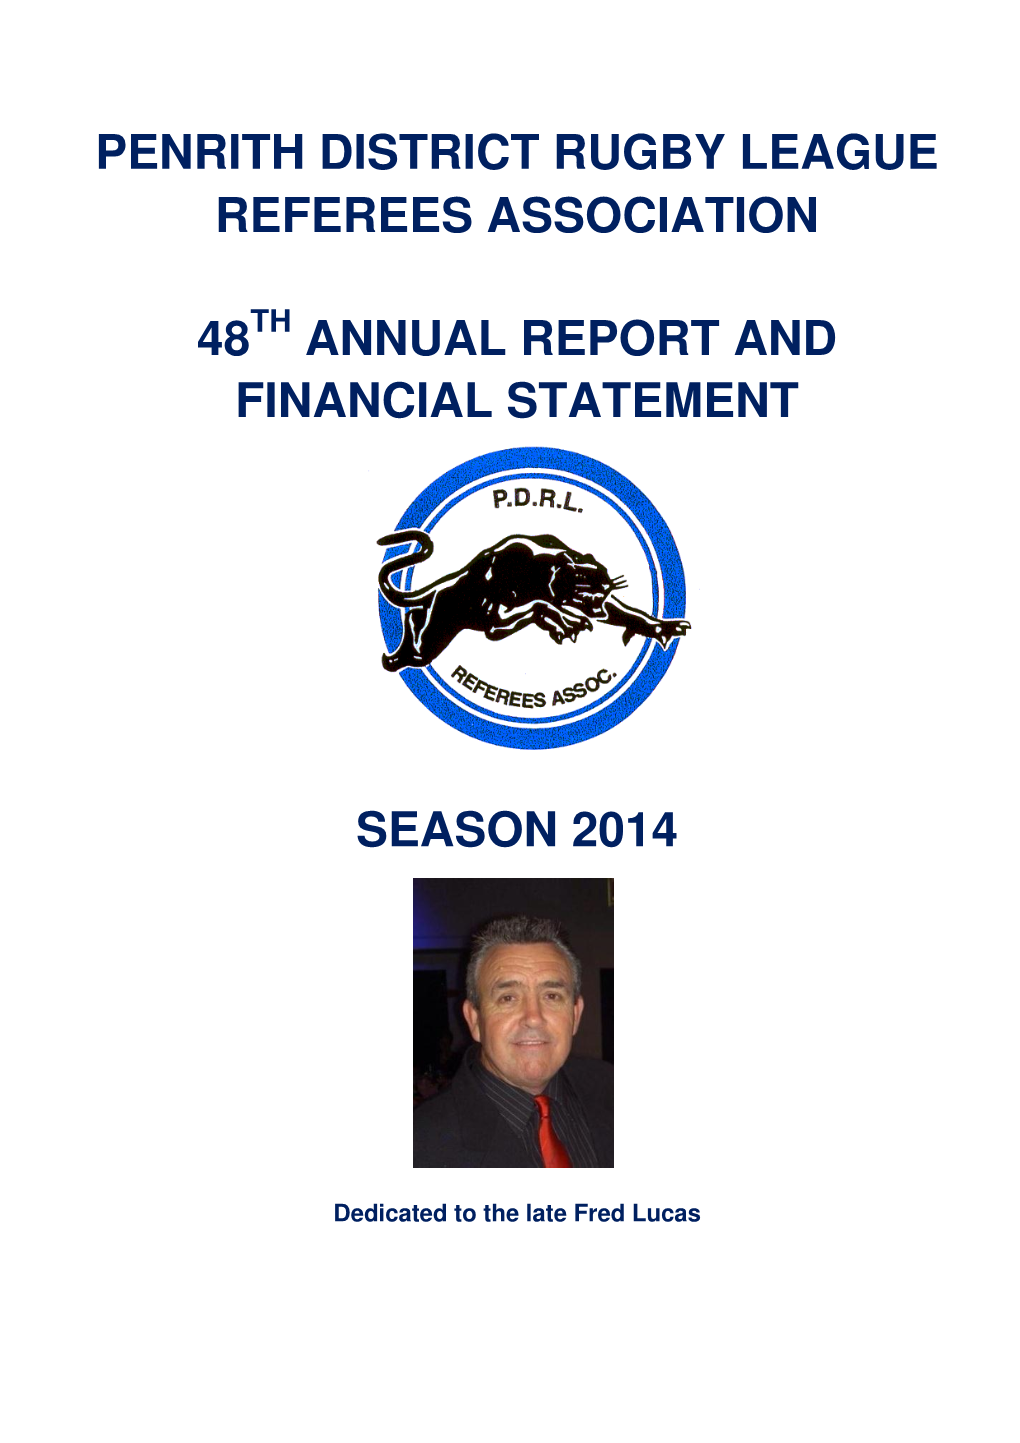 Penrith District Rugby League Referees Association 48 Annual Report and Financial Statement Season 2014